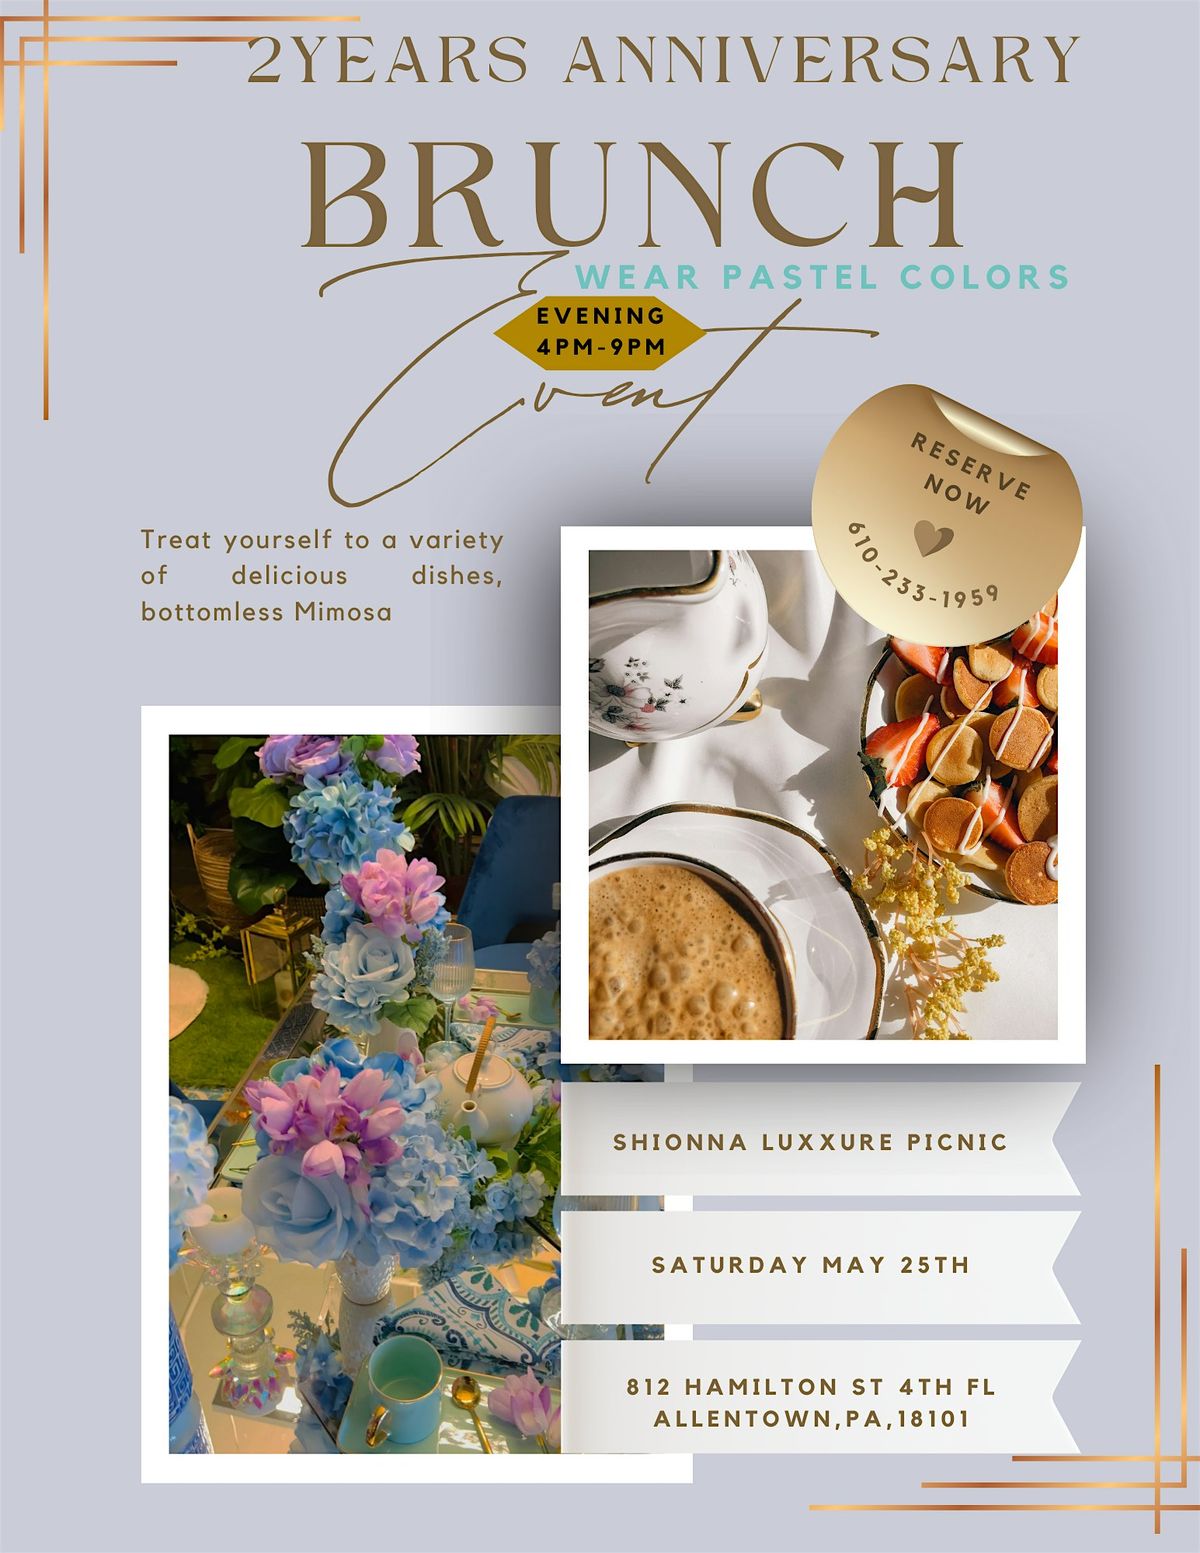 Our 2nd anniversary celebration brunch